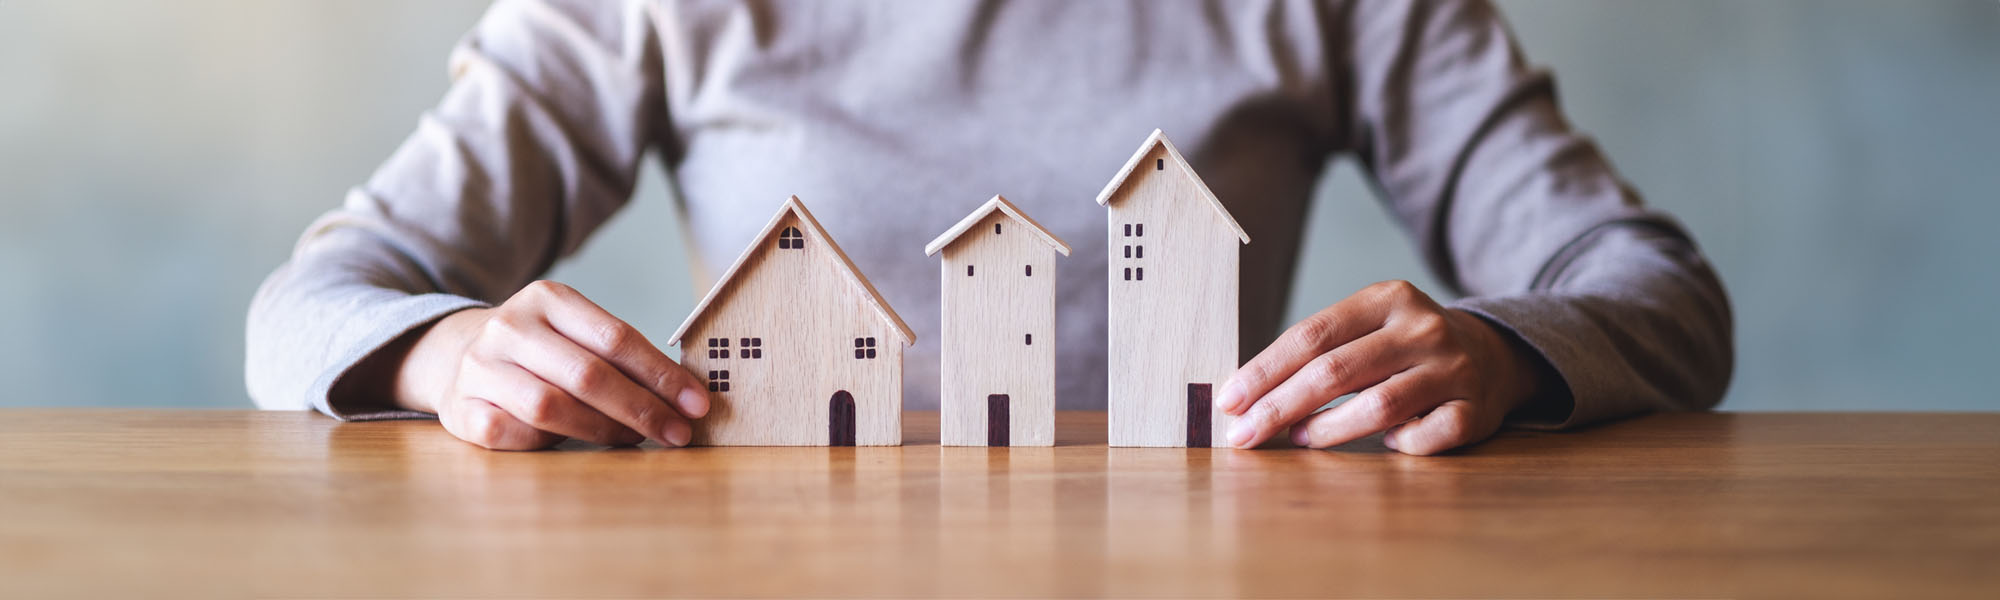 closeup image of a woman holding wooden house models